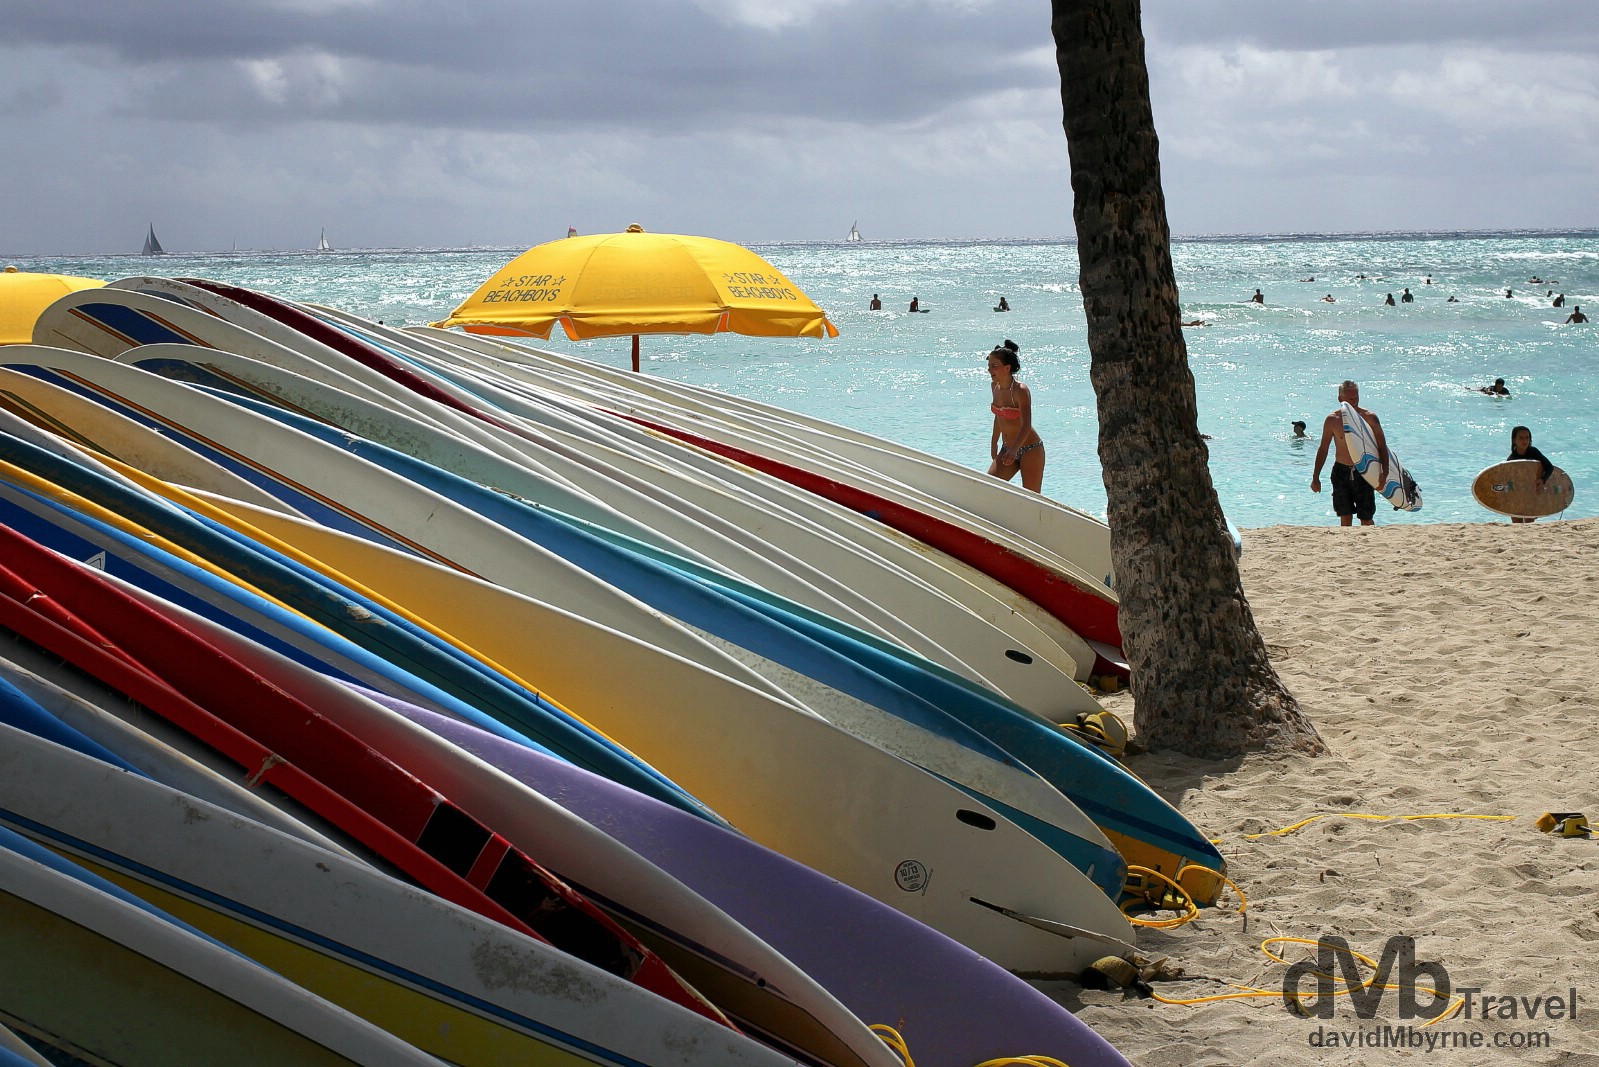 Surfboards lined up on a section of Waikiki Beach, Oahu, Hawaii, USA. March 9th 2013.